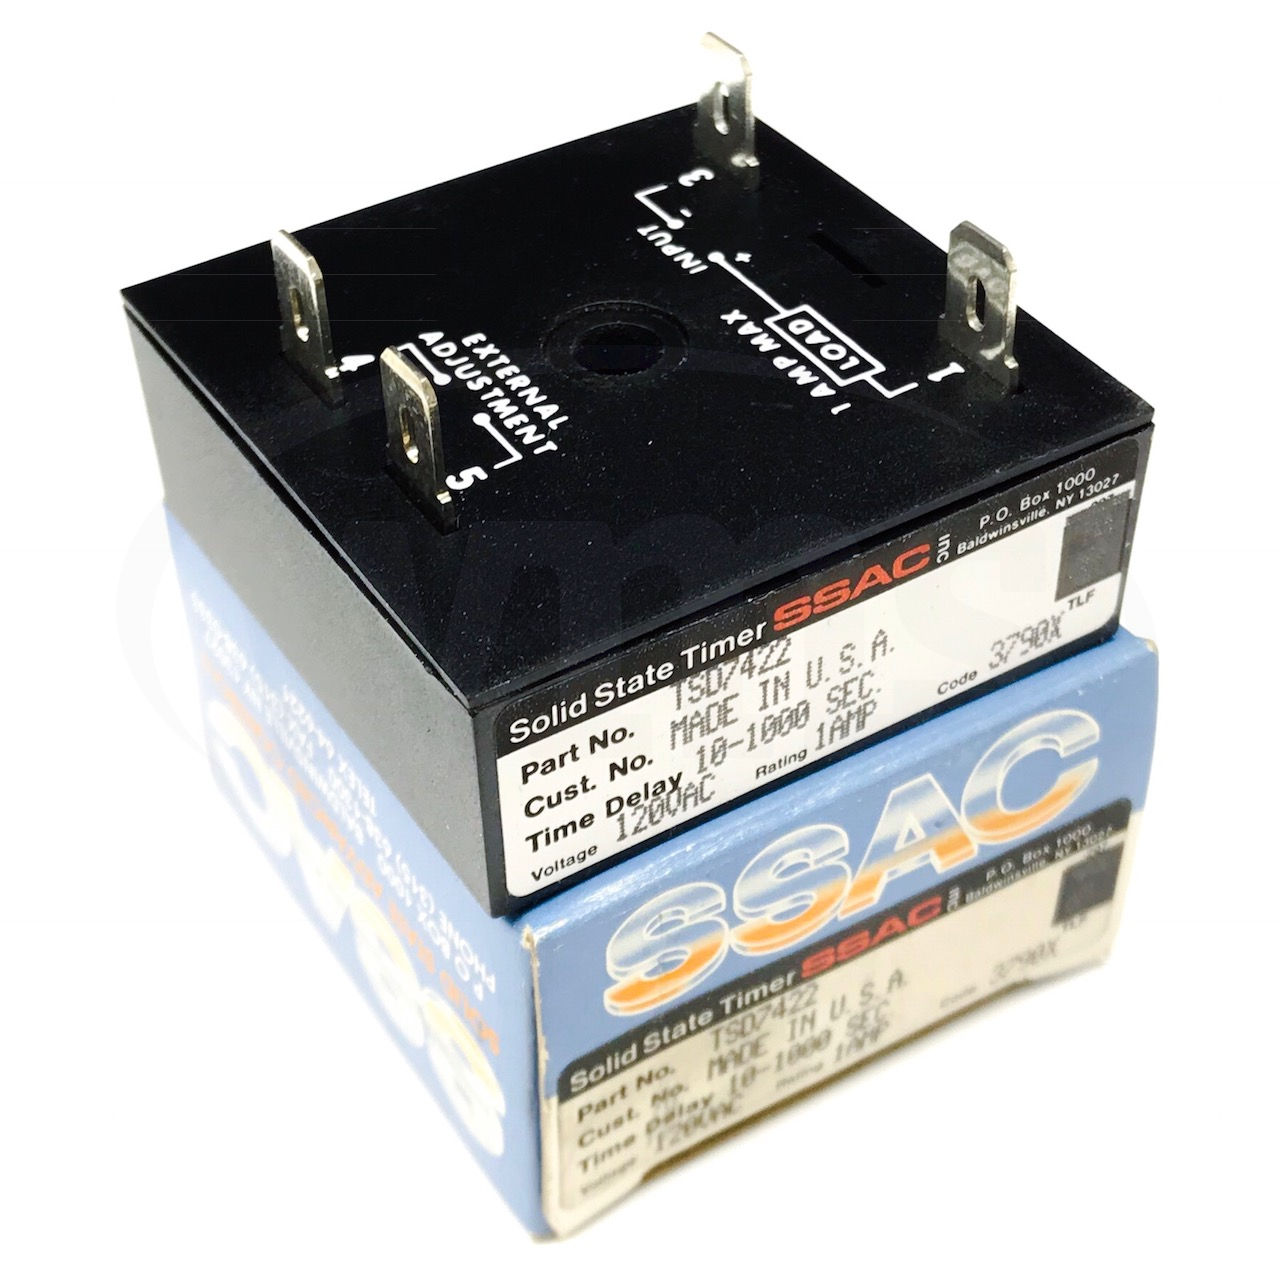 Details about   SSAC Solid State Timer New TDUBH3000A 